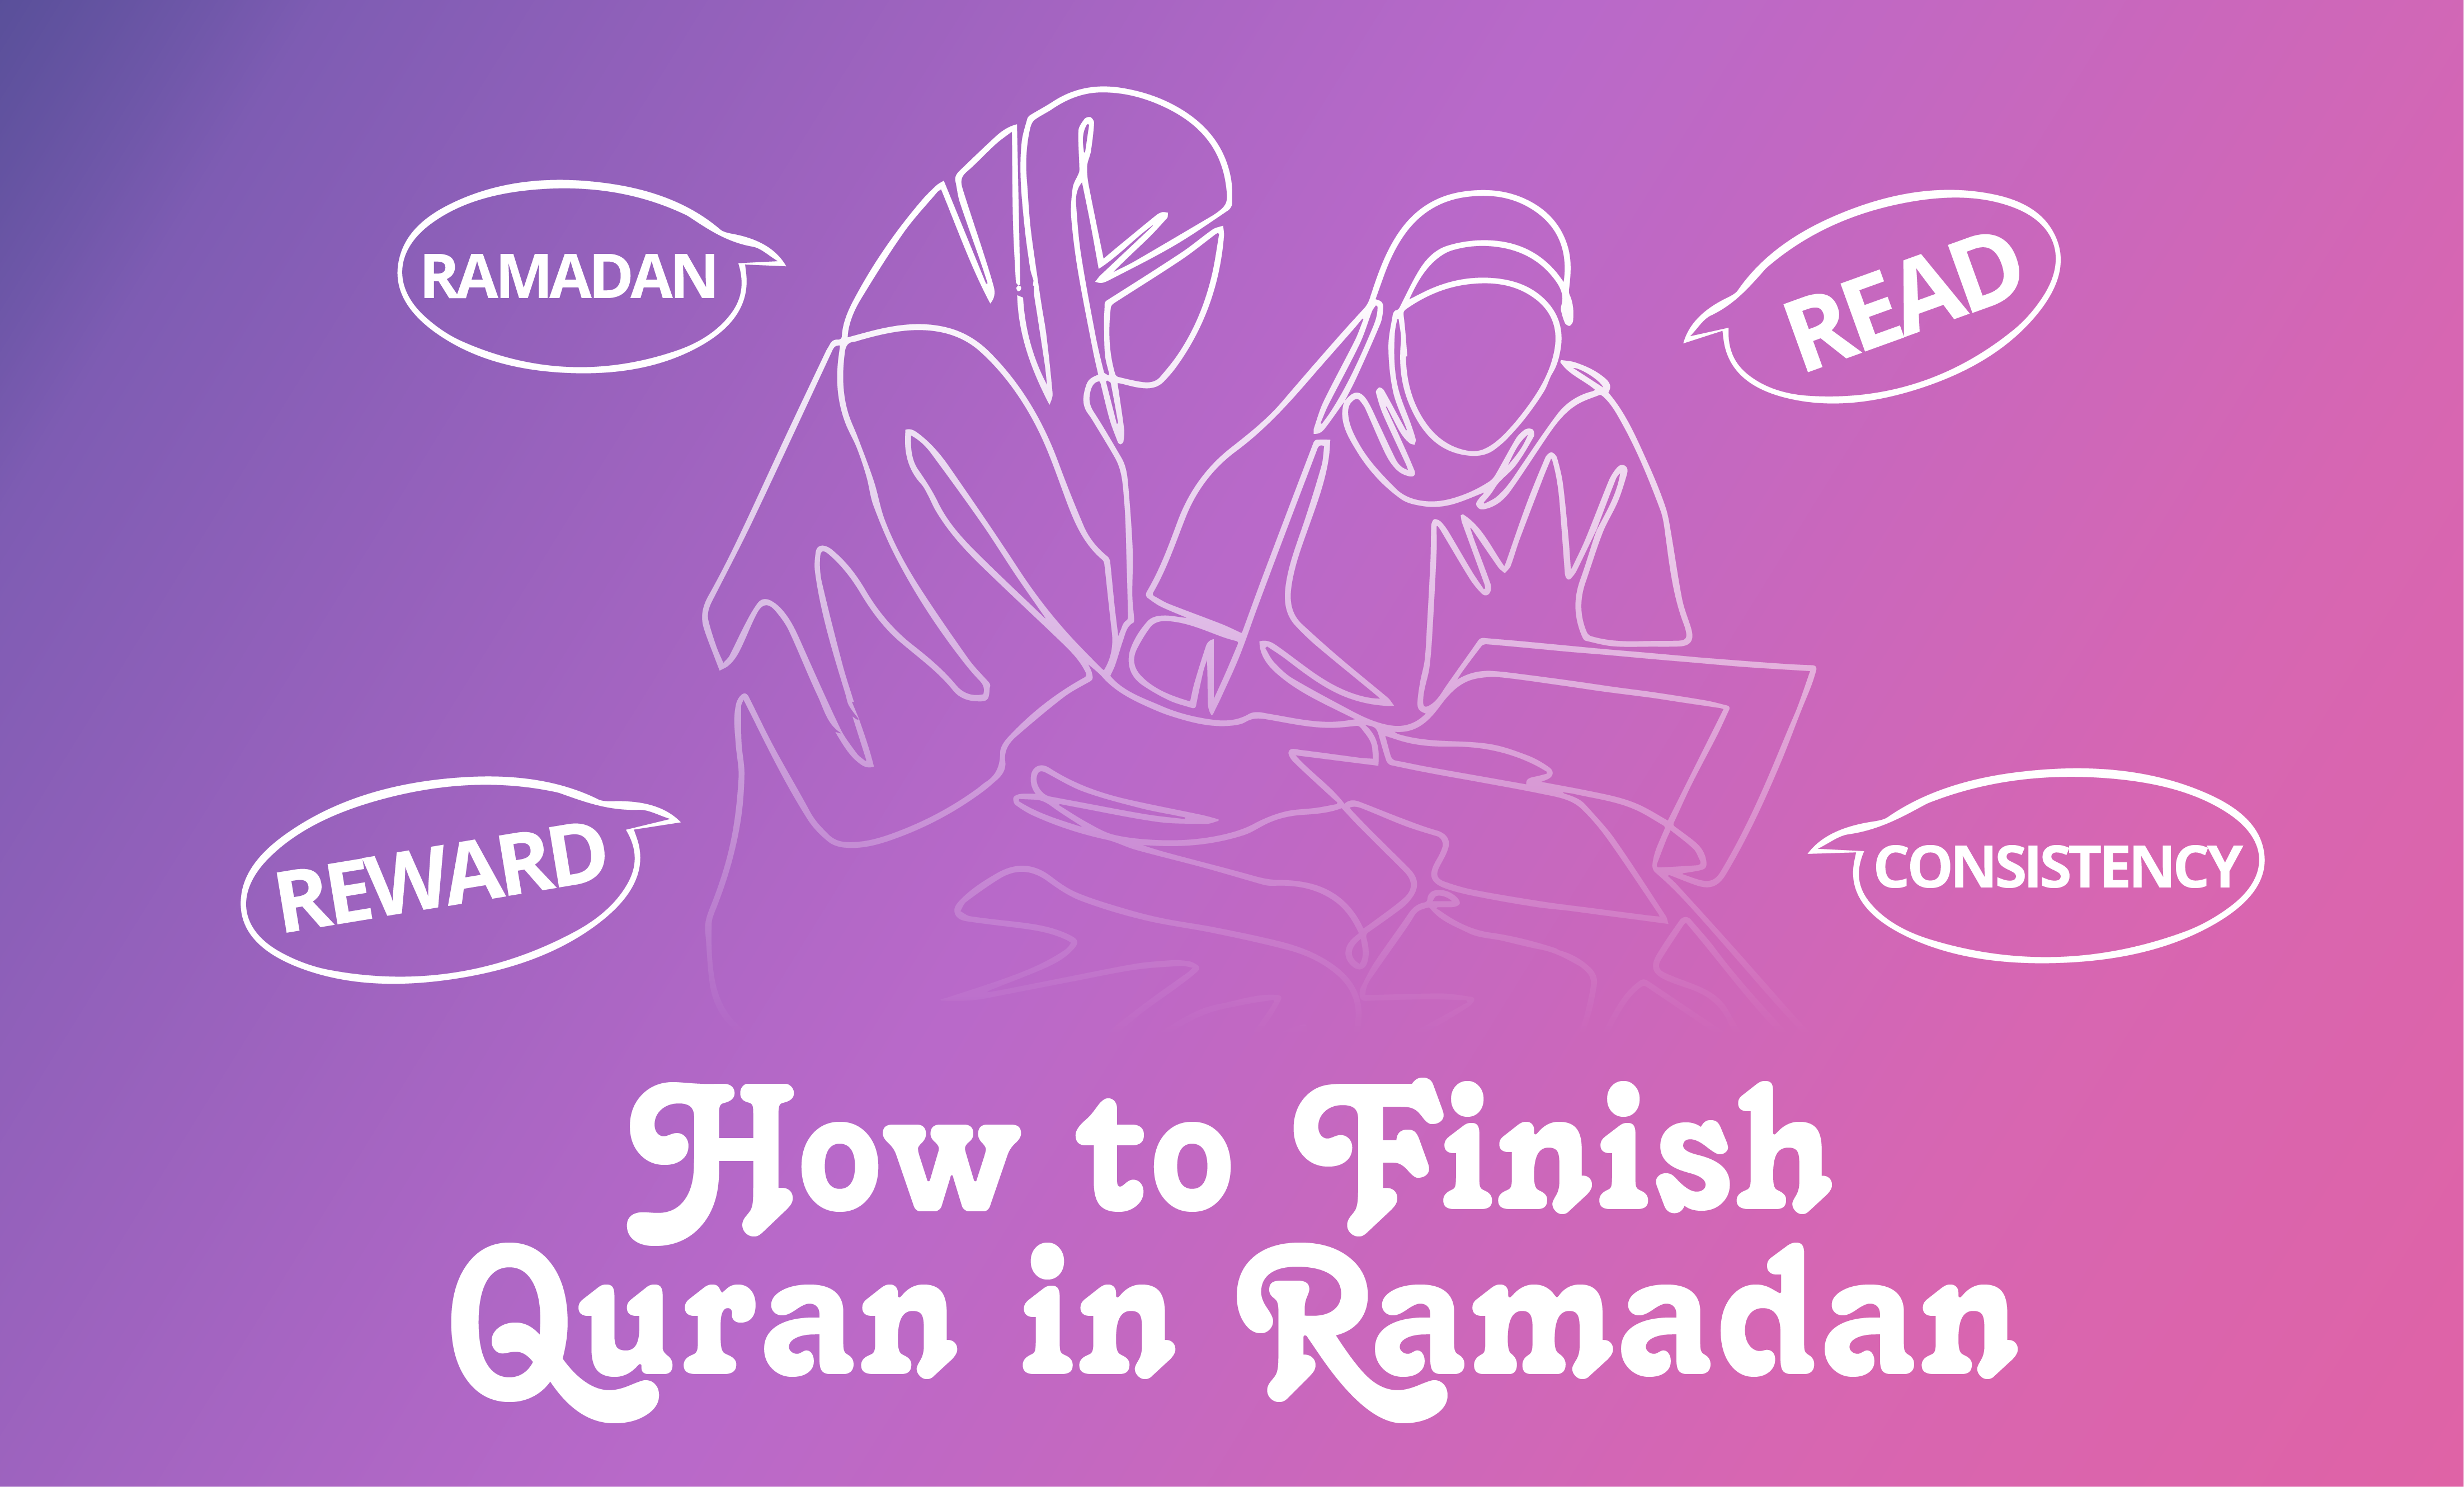 How to complete Quran during Ramadan?